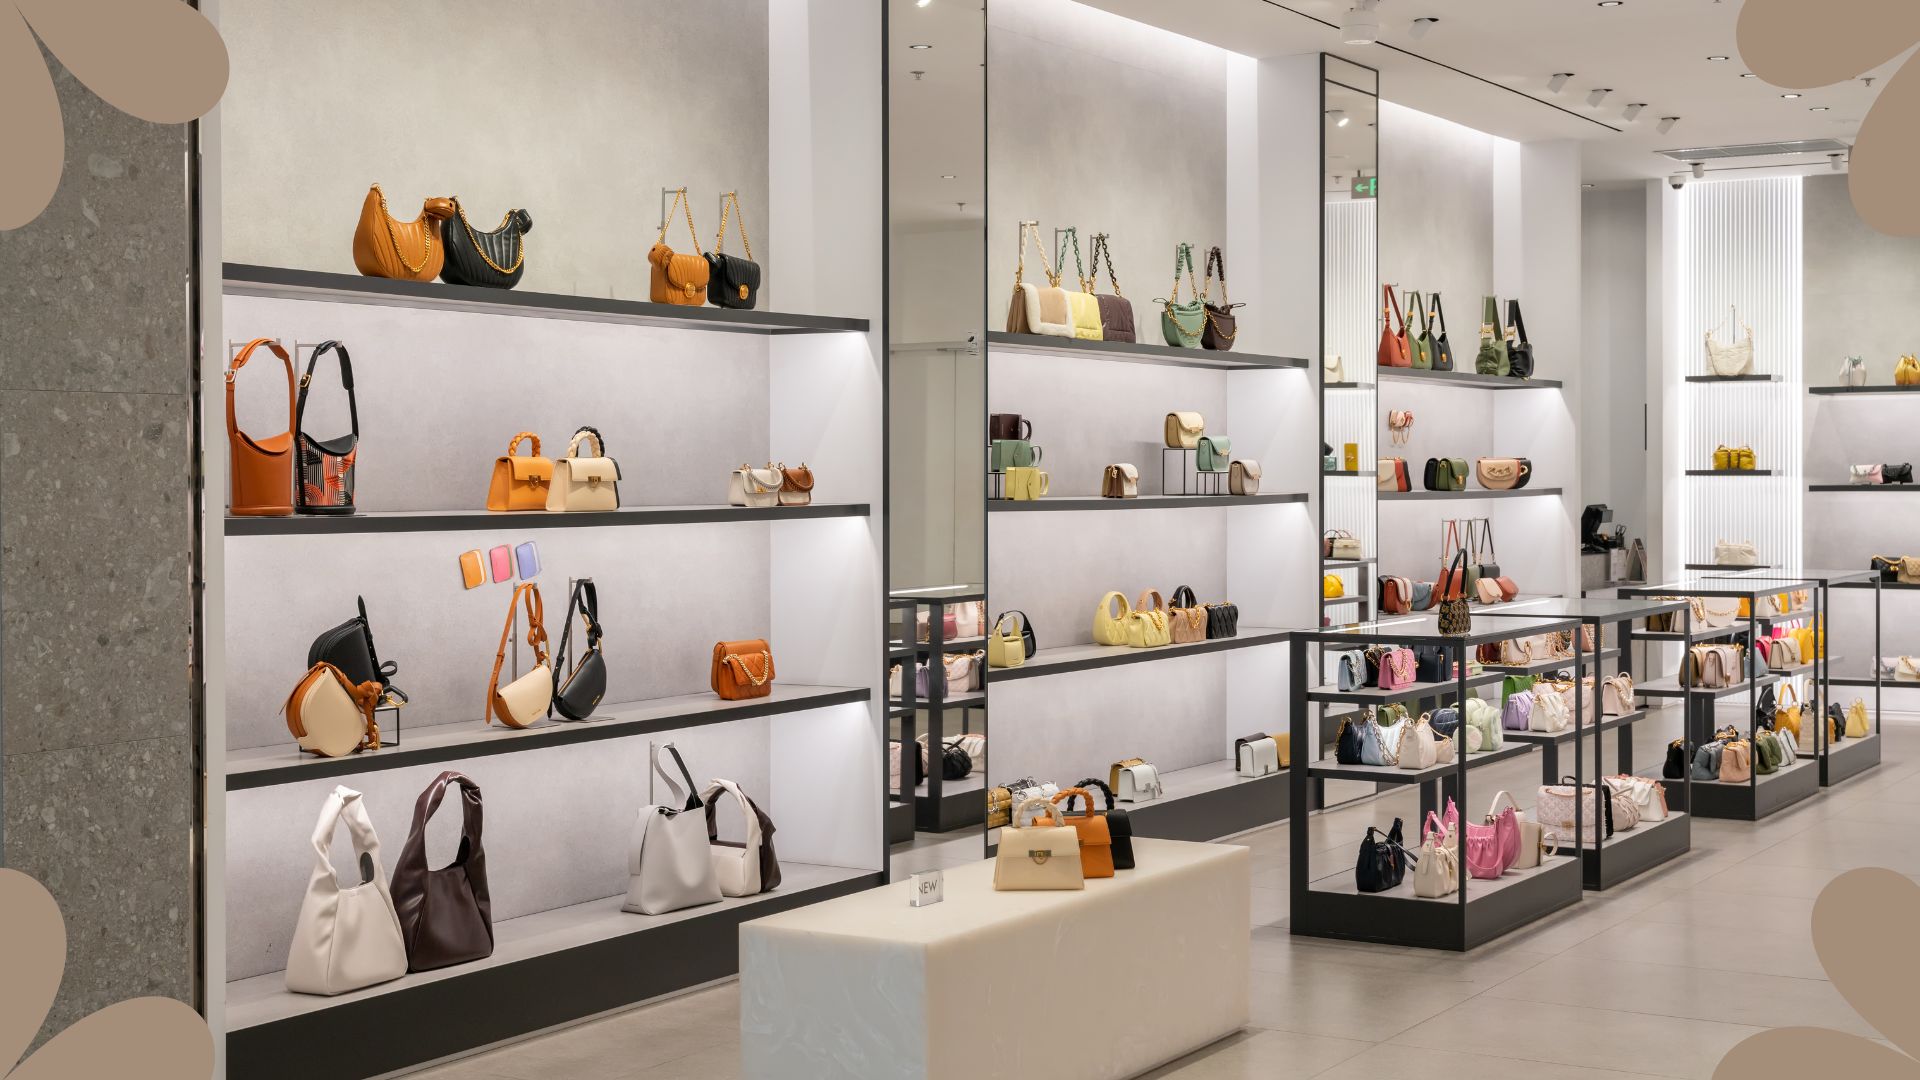 3 Mistakes To Avoid When Buying Used Louis Vuitton Handbags